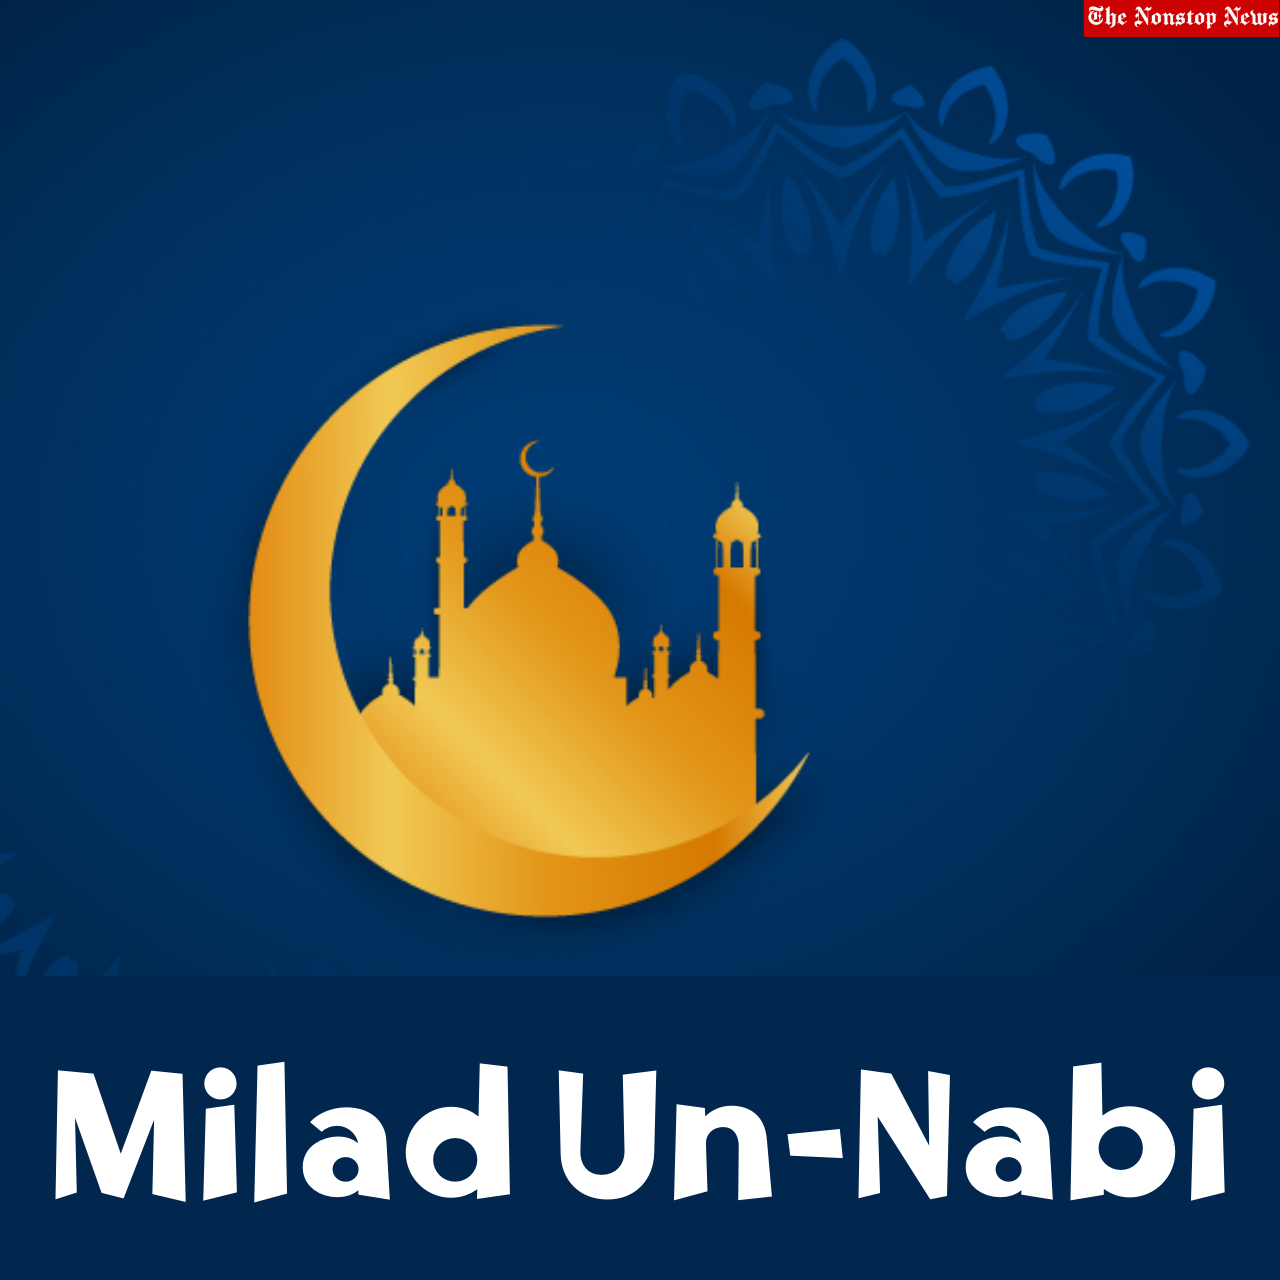 Milad Un-Nabi 2021 Status, DP, Wallpaper, Instagram Caption, Facebook Greetings, and WhatsApp Messages to Share